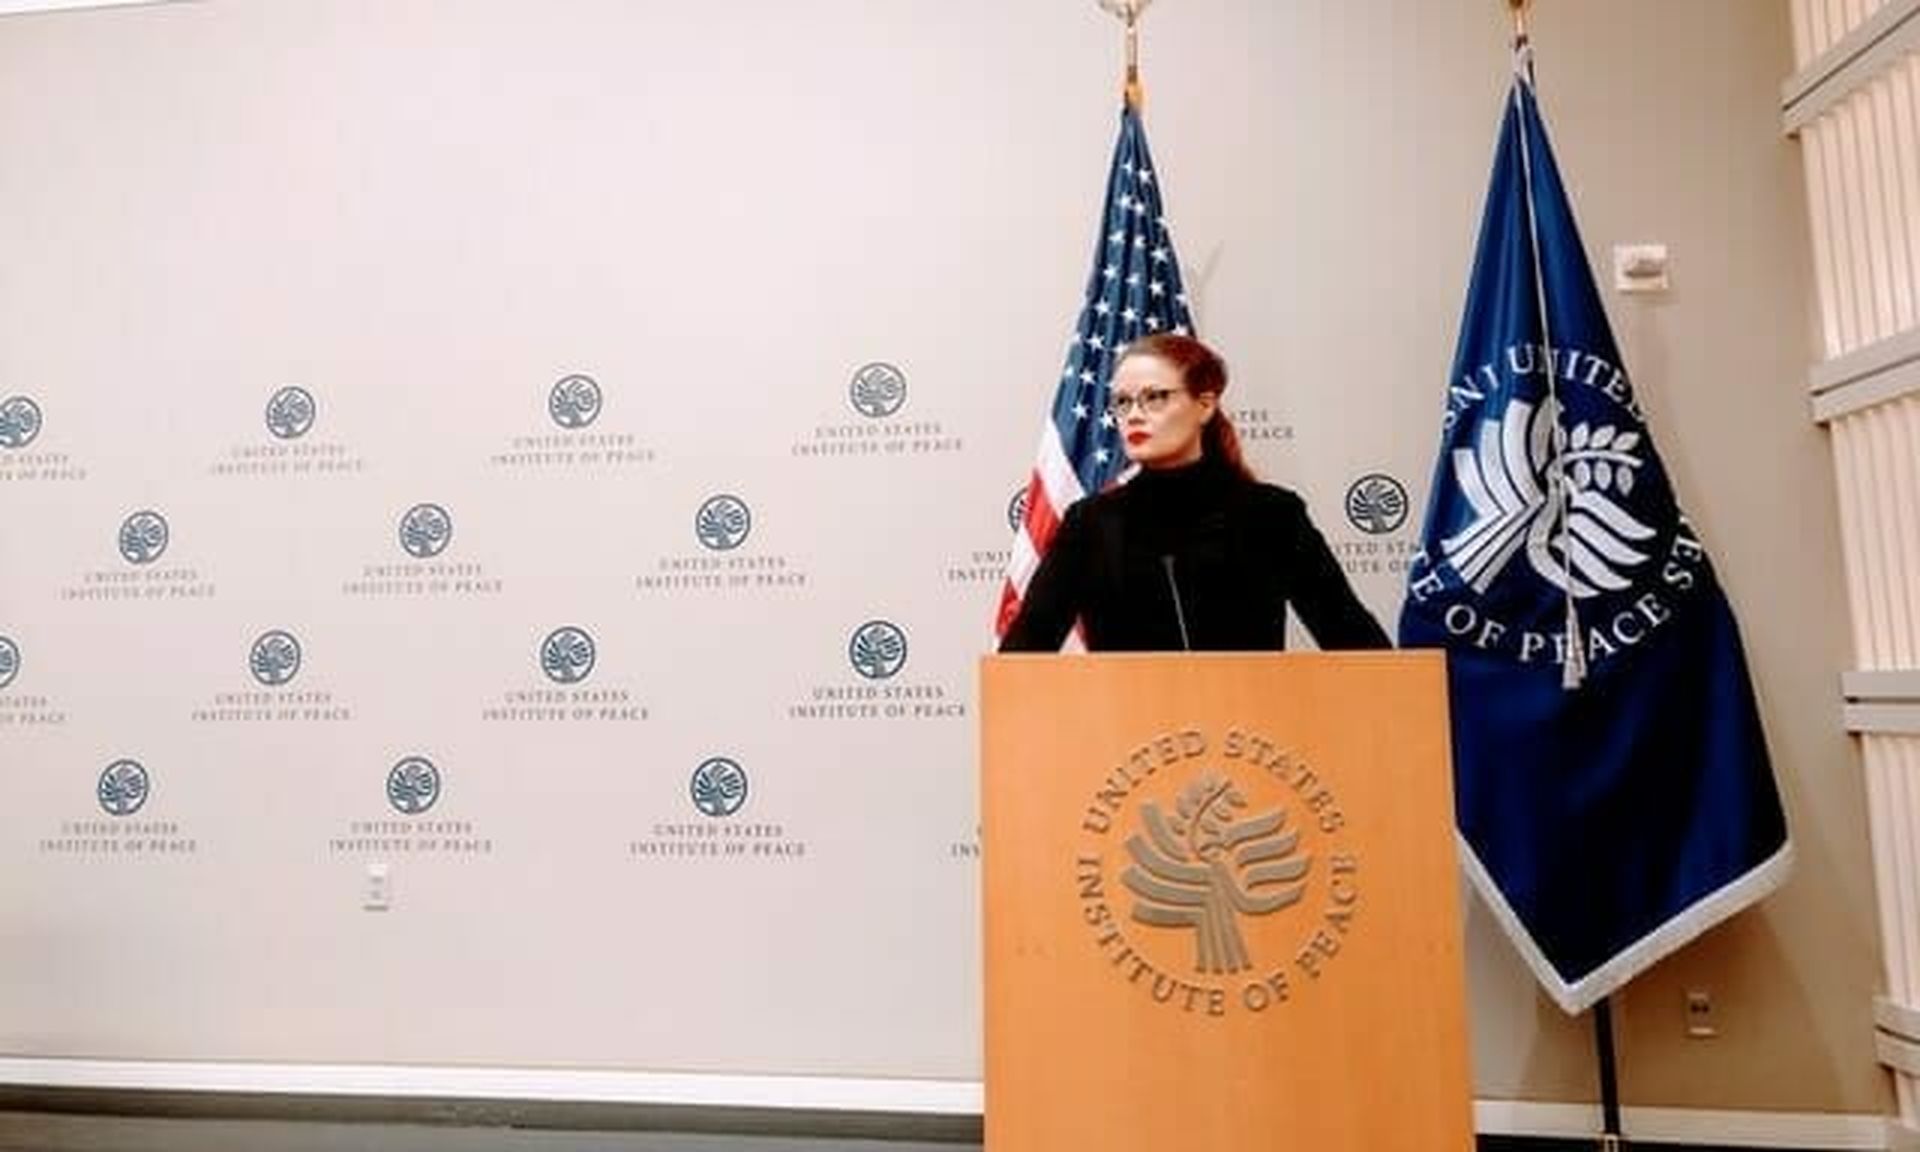 Tarah Wheeler, cybersecurity policy fellow at New America, speaks at the U.S. Institute of Peace.